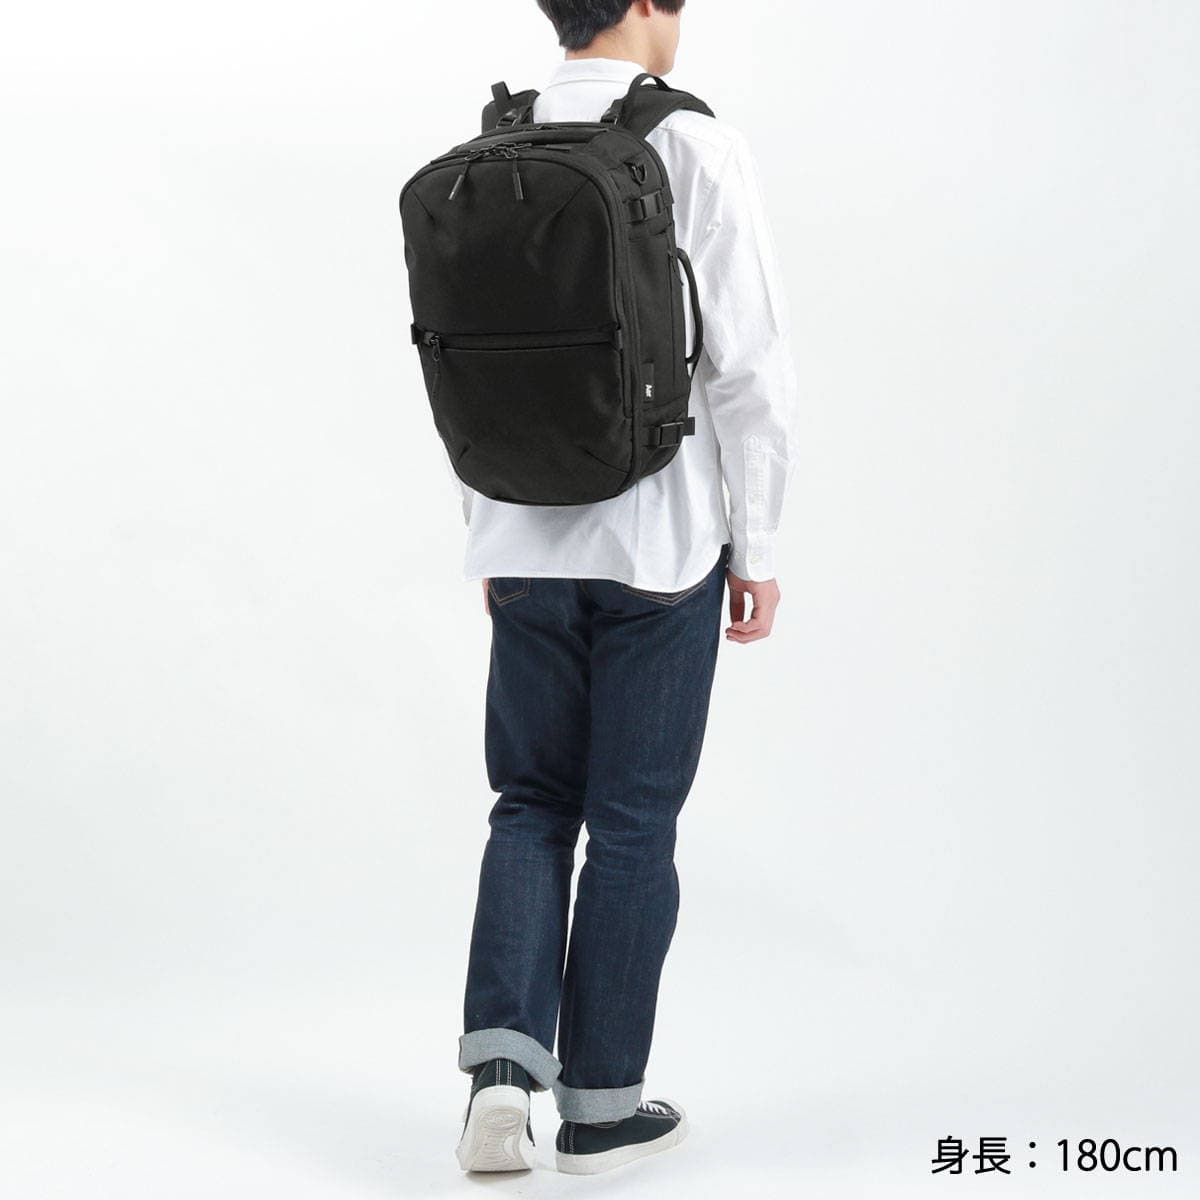 Aer エアー Travel Collection Travel Pack 3 Small バックパック 28L ...